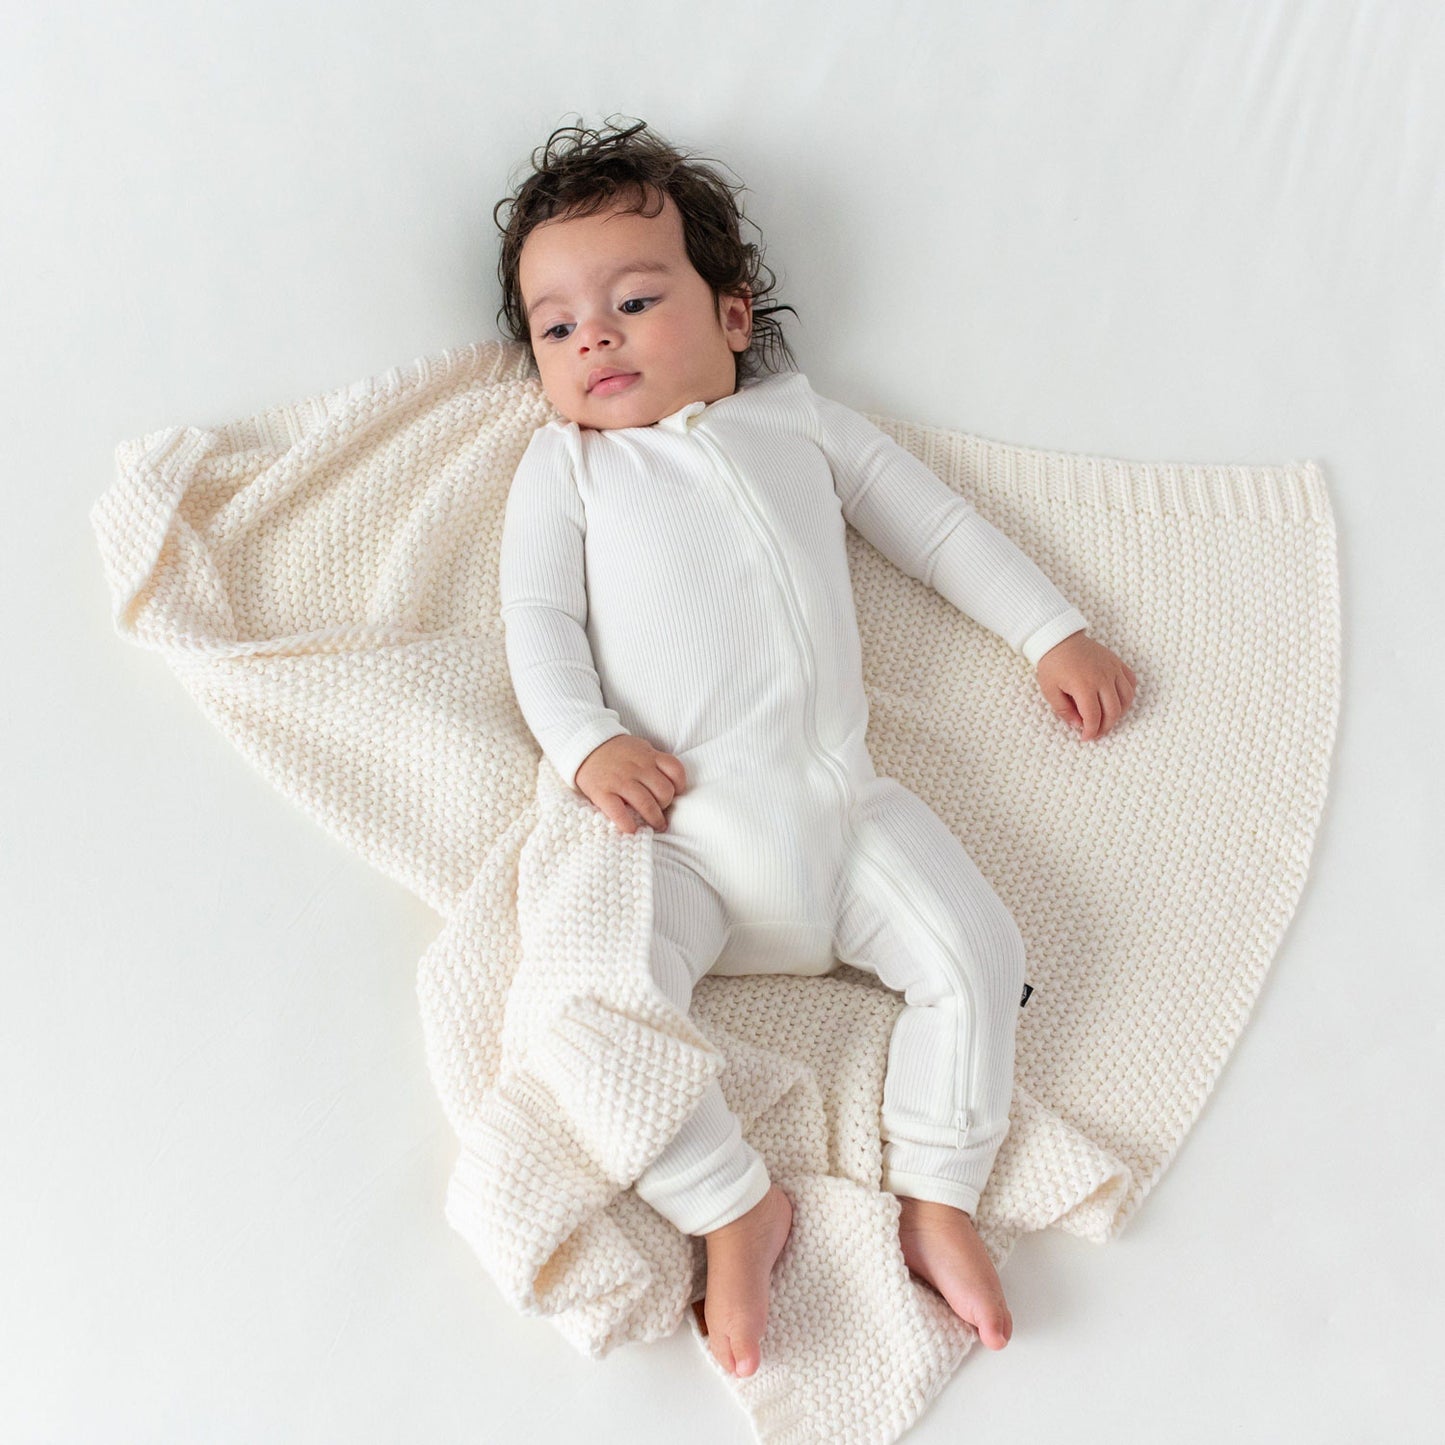 Baby lying on Kyte BABY Chunky Knit Baby Blanket - Cloud